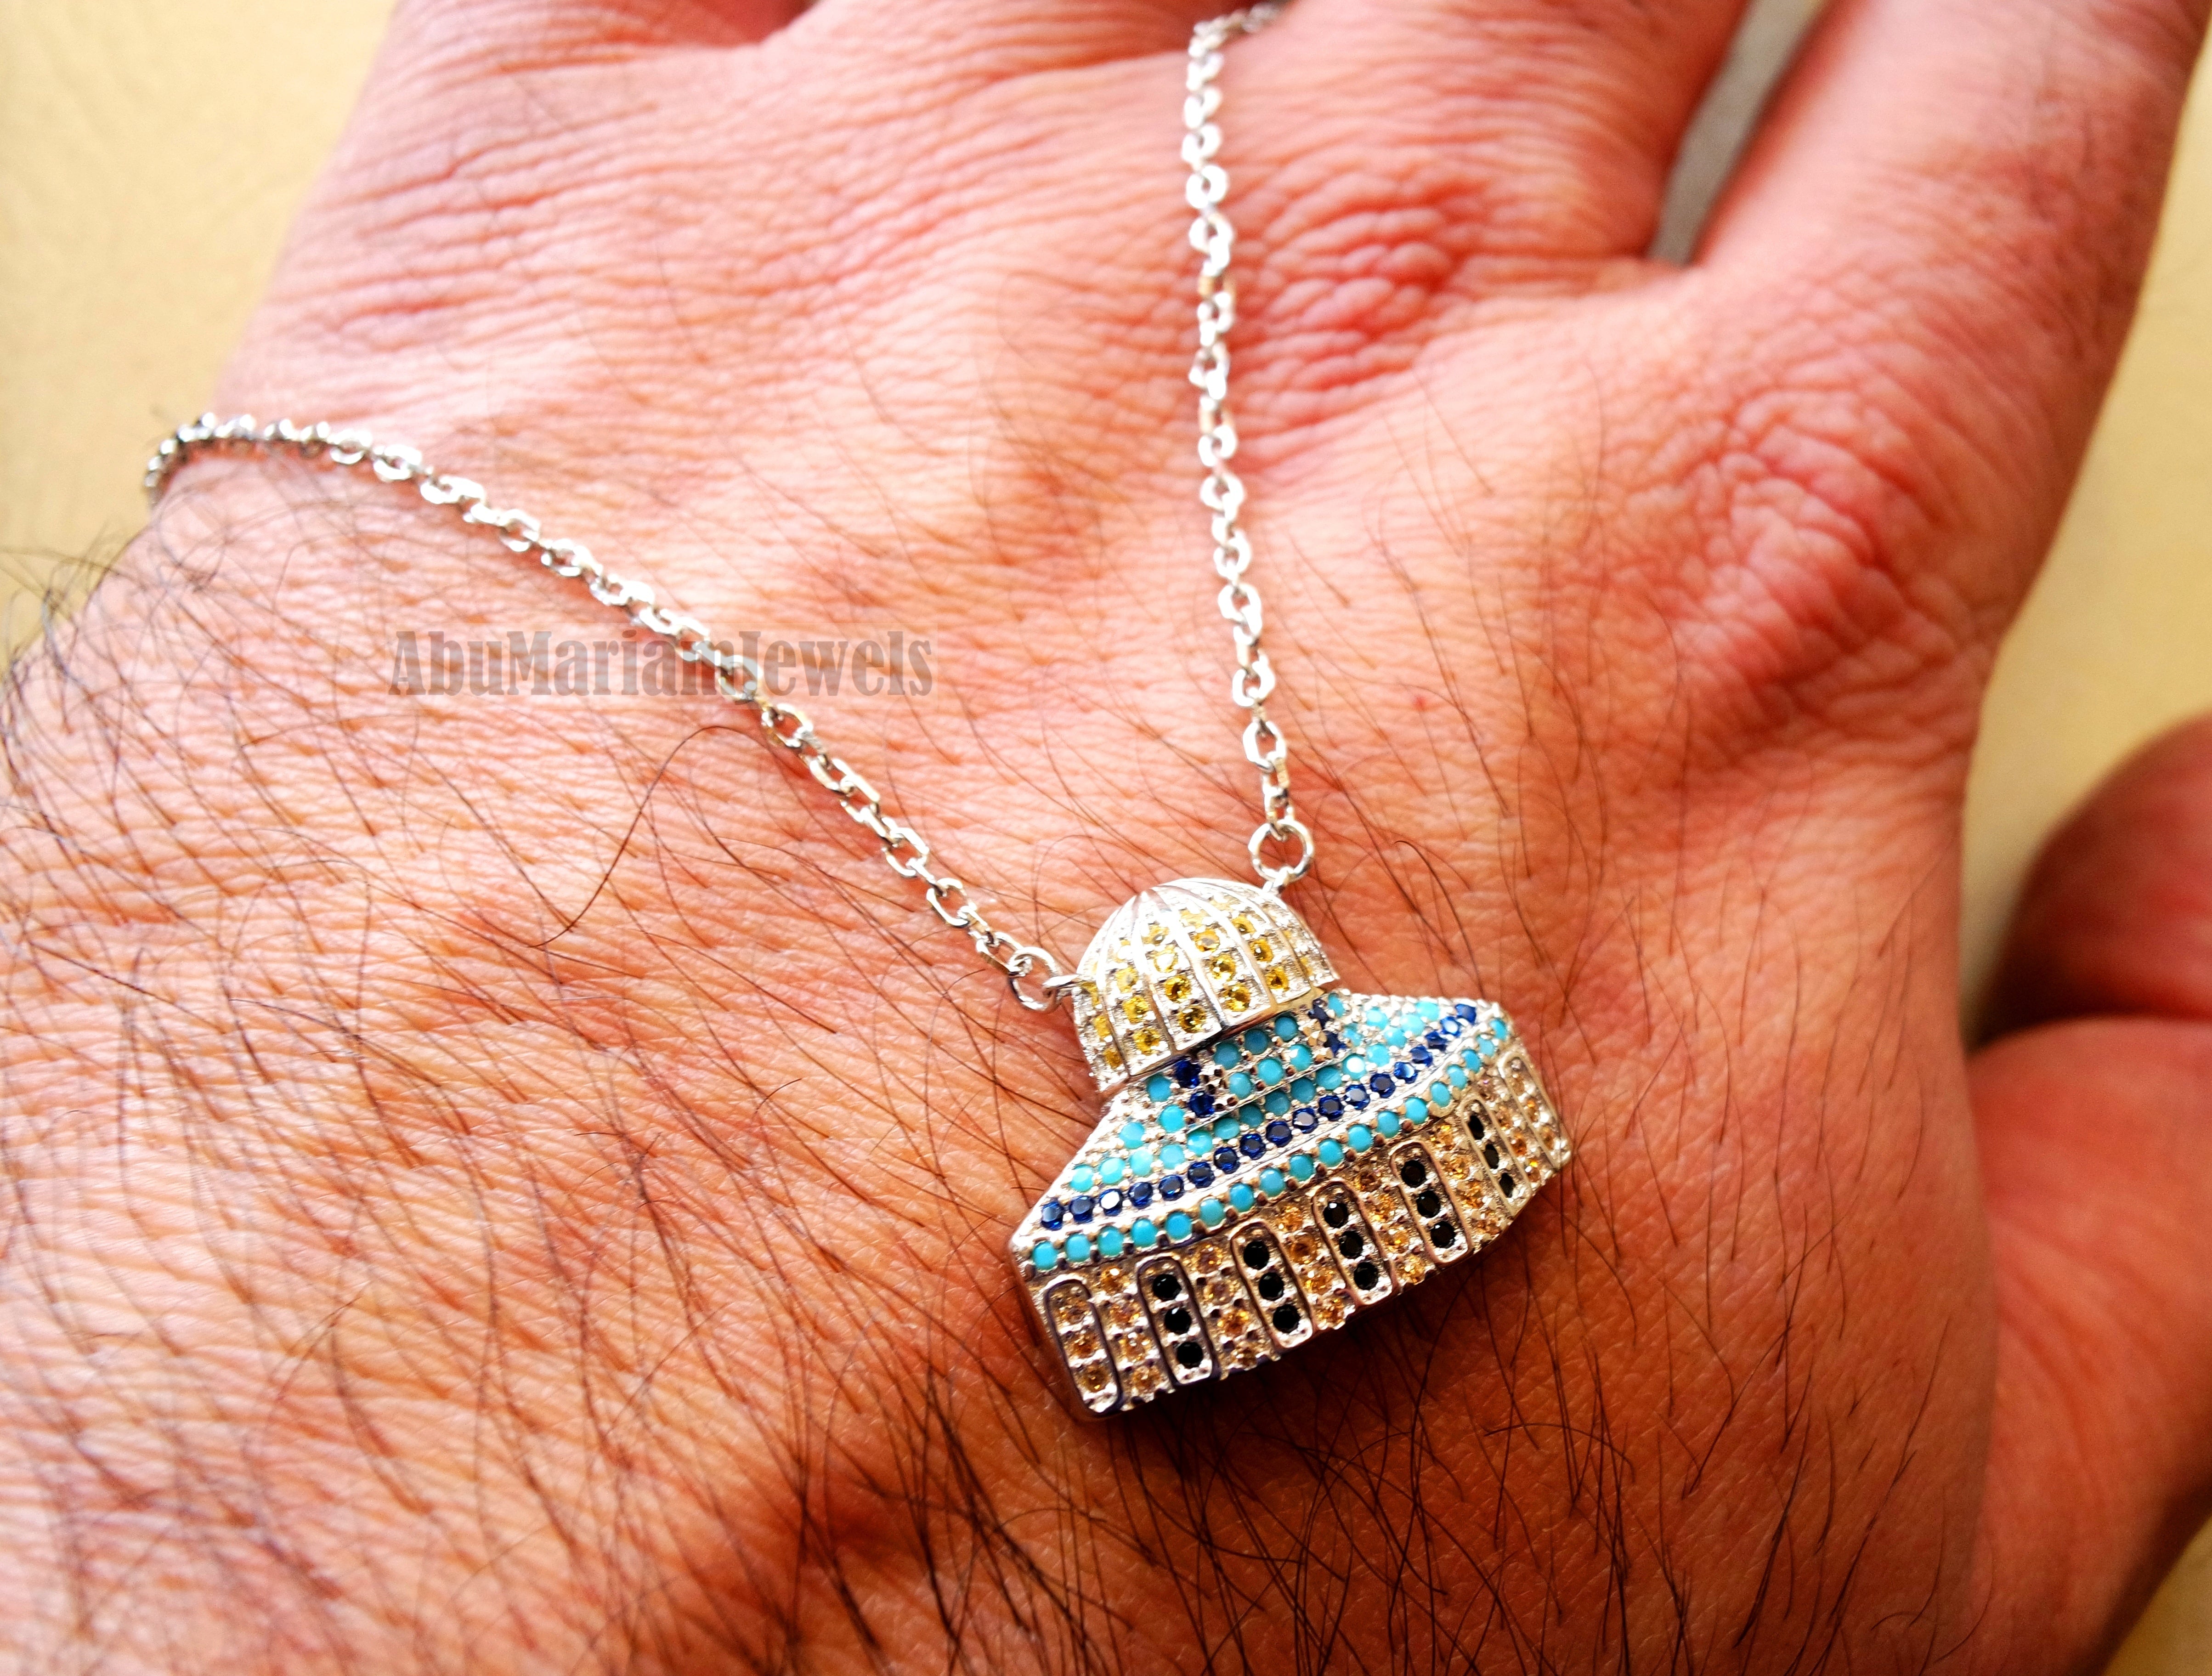 Al Aqsa mosque necklace muslim gift sterling silver 925 with cubic Zirconia colorful micro setting المسجد الأقصى